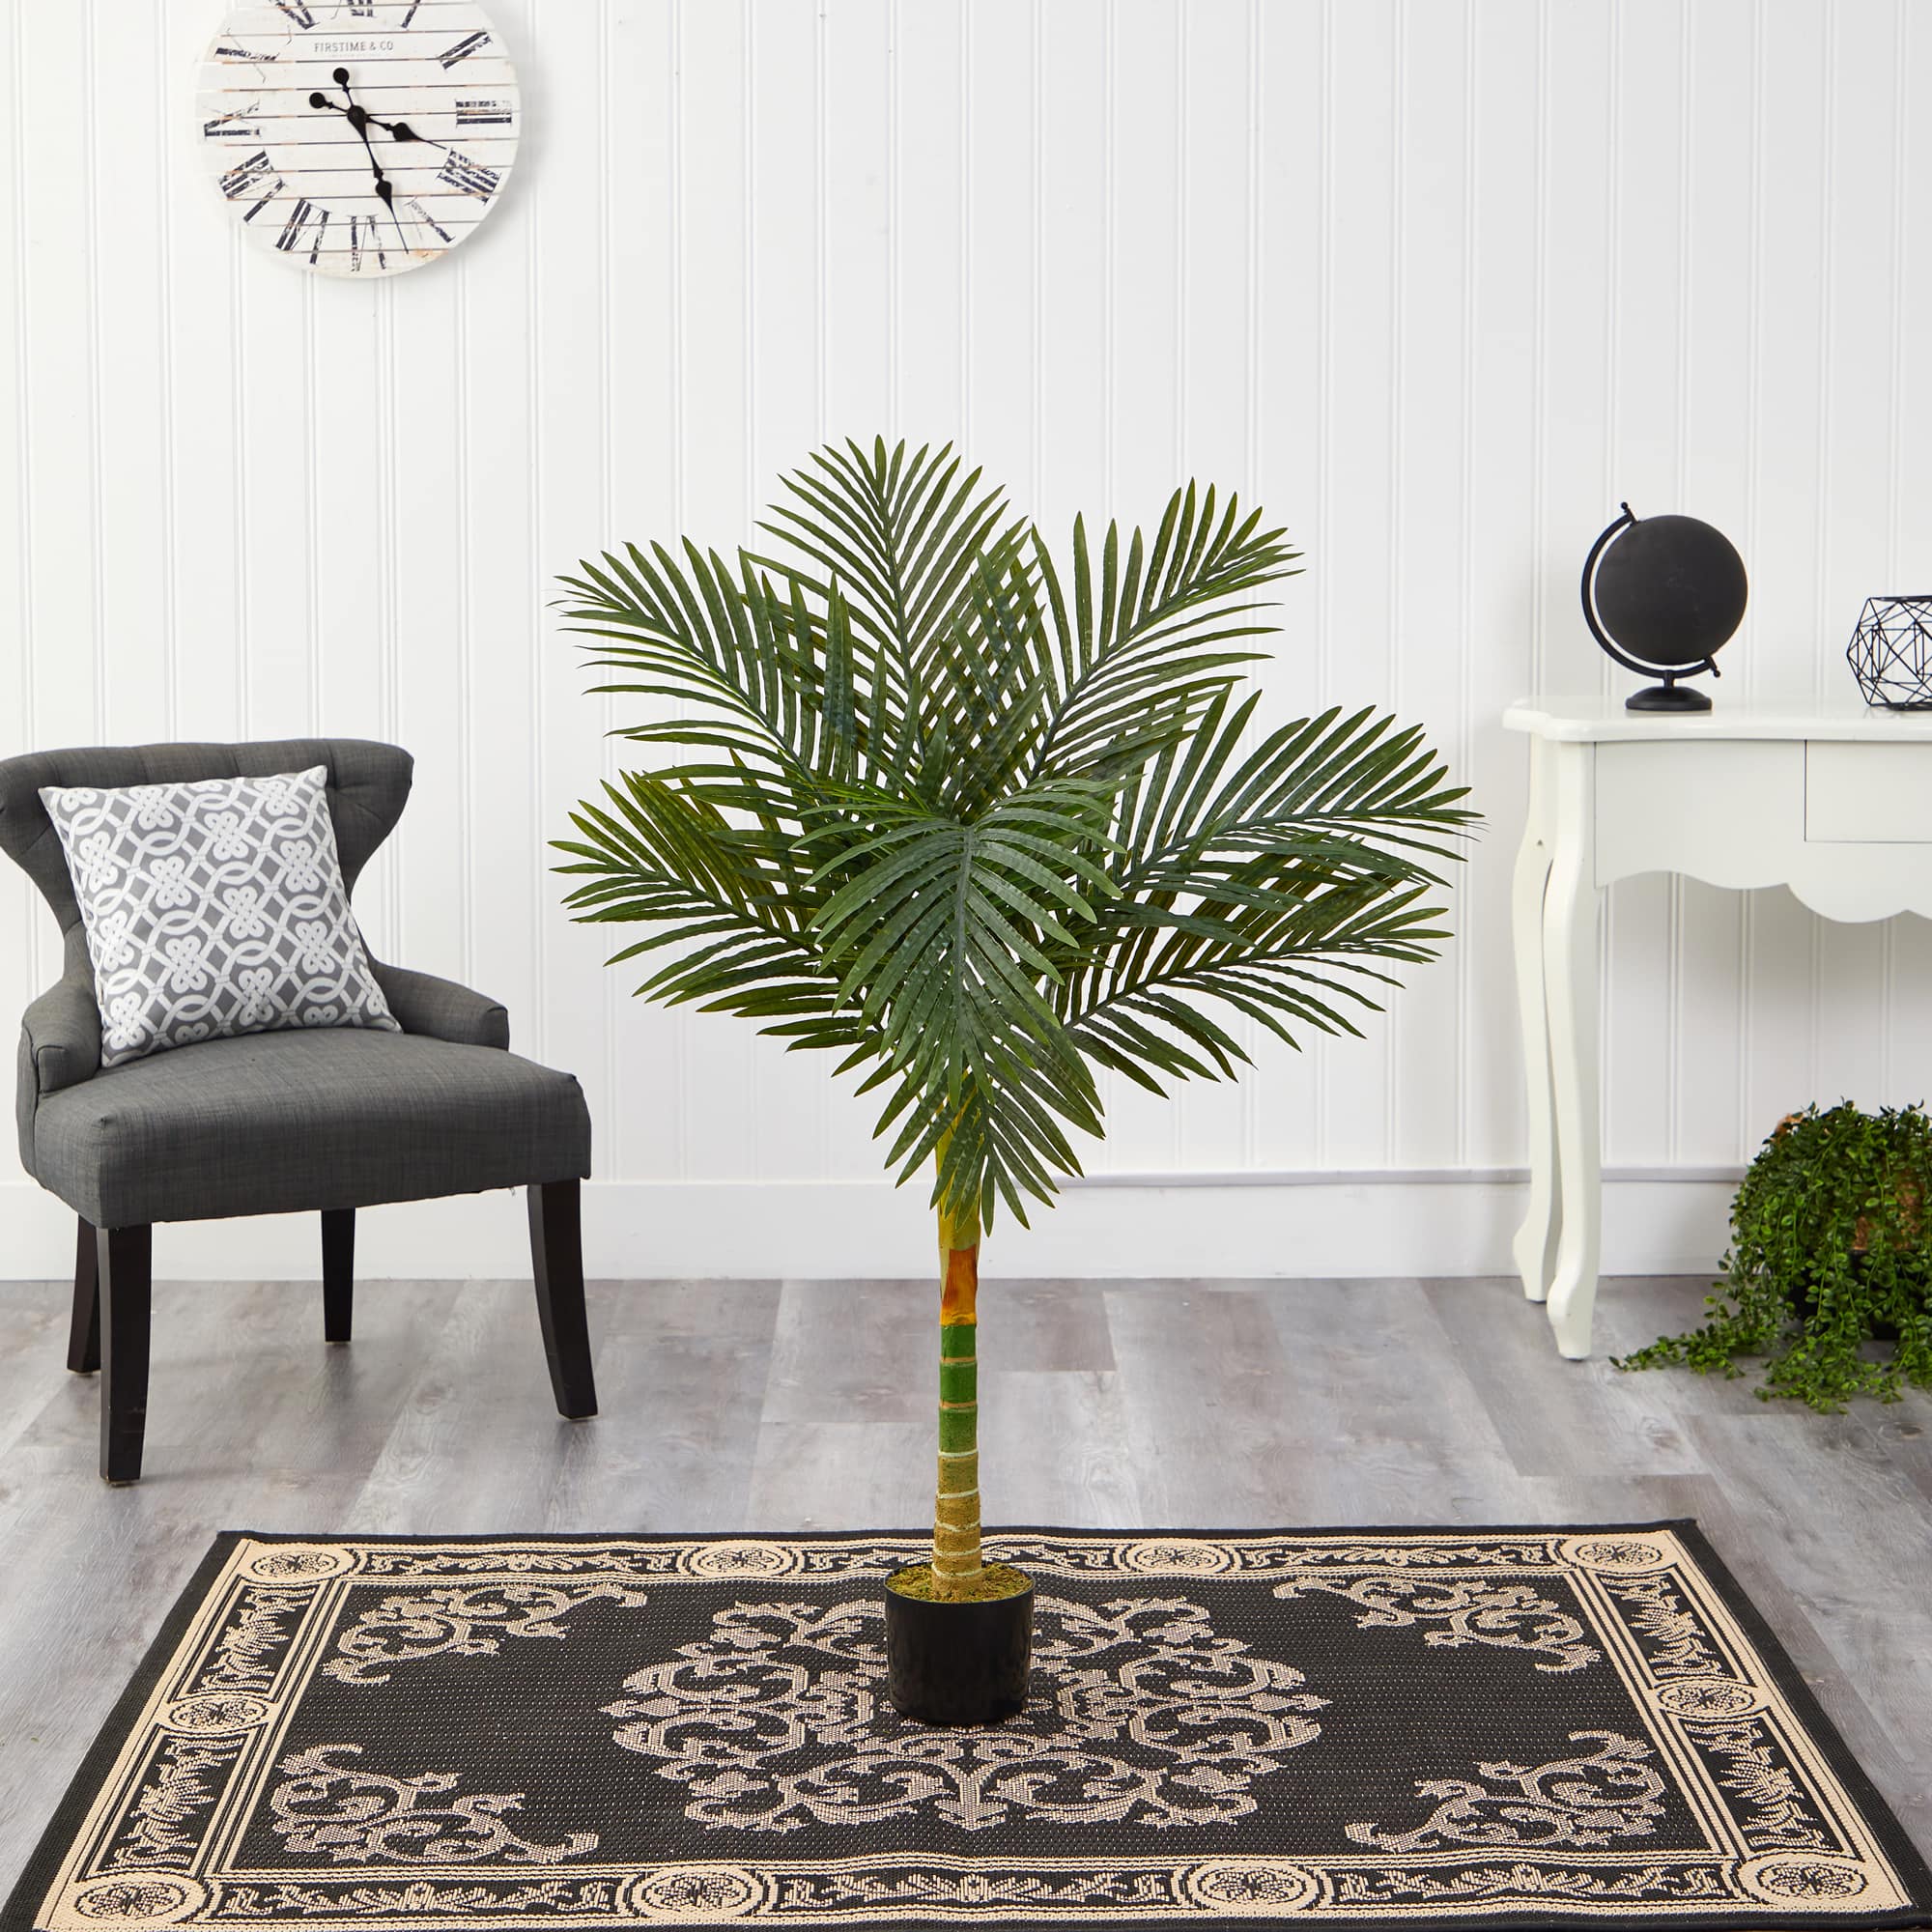 4ft. Potted Golden Cane Palm Tree